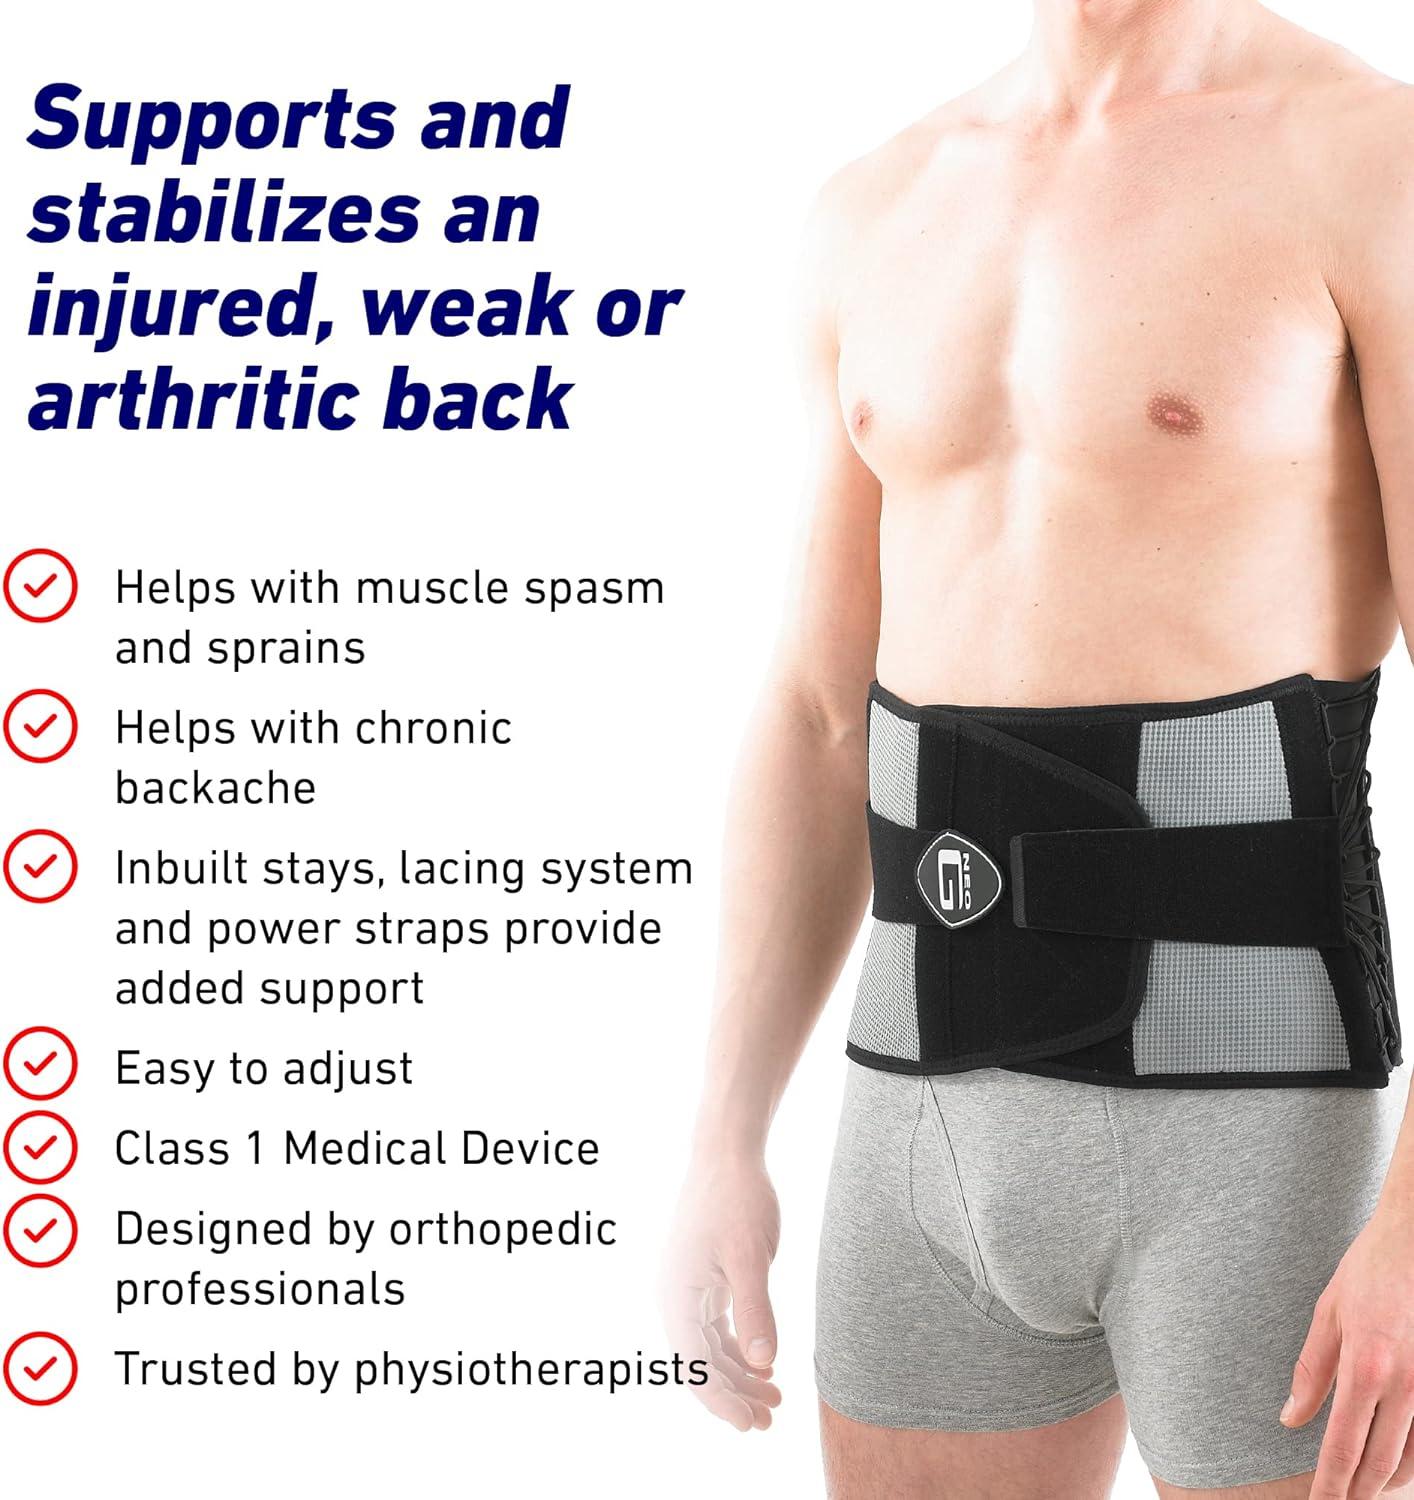 Back Brace Support with Power Straps